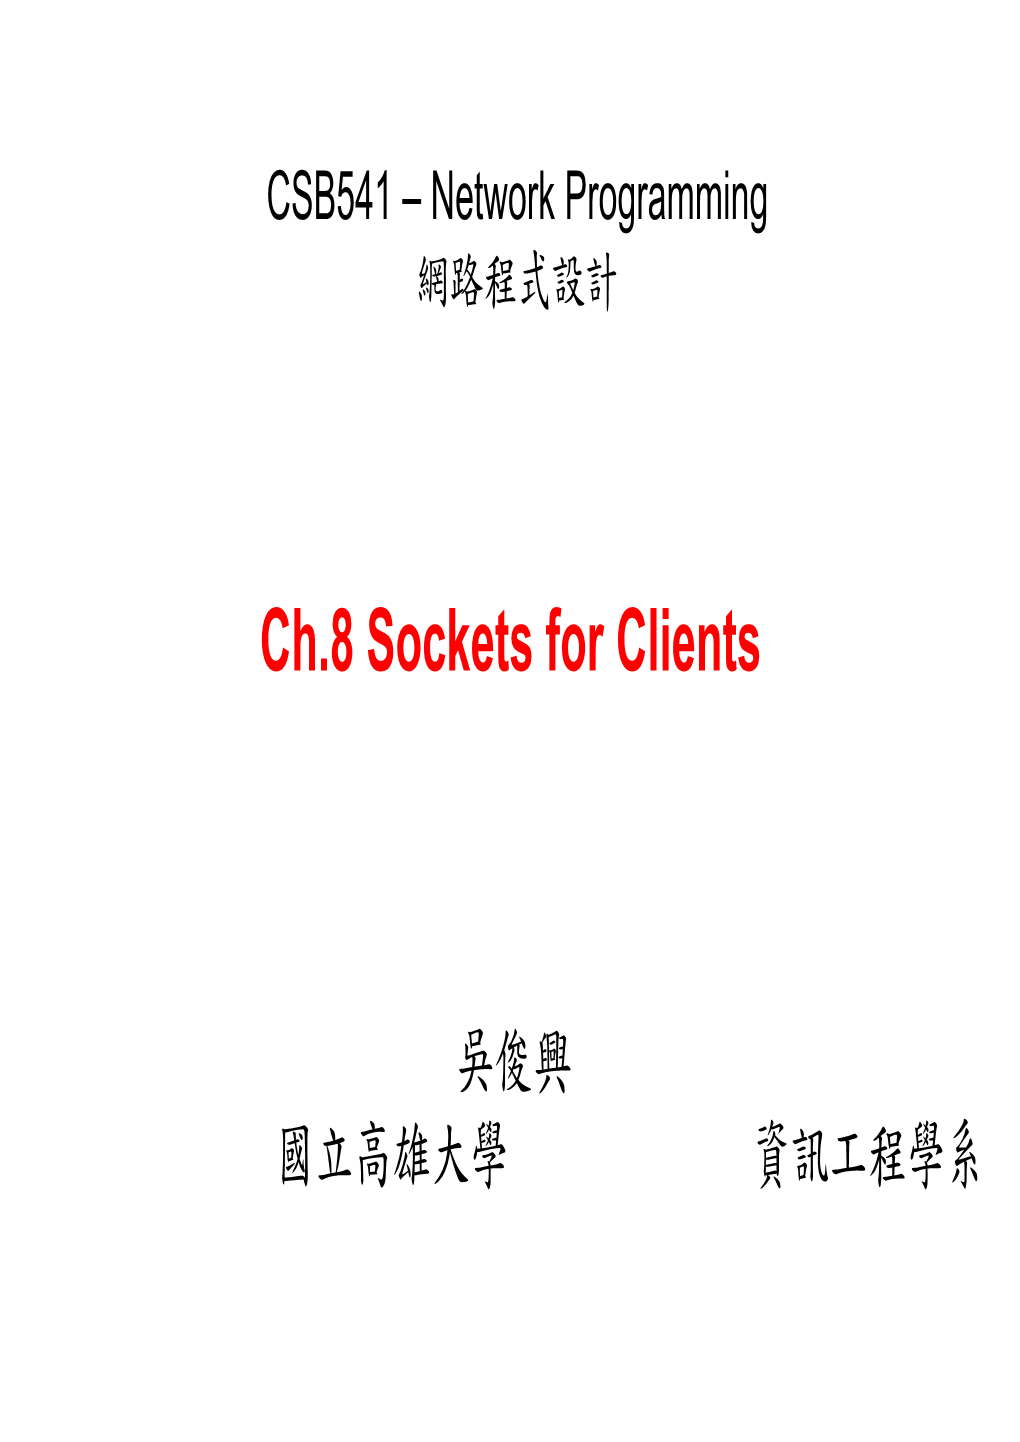 8. Sockets for Clients